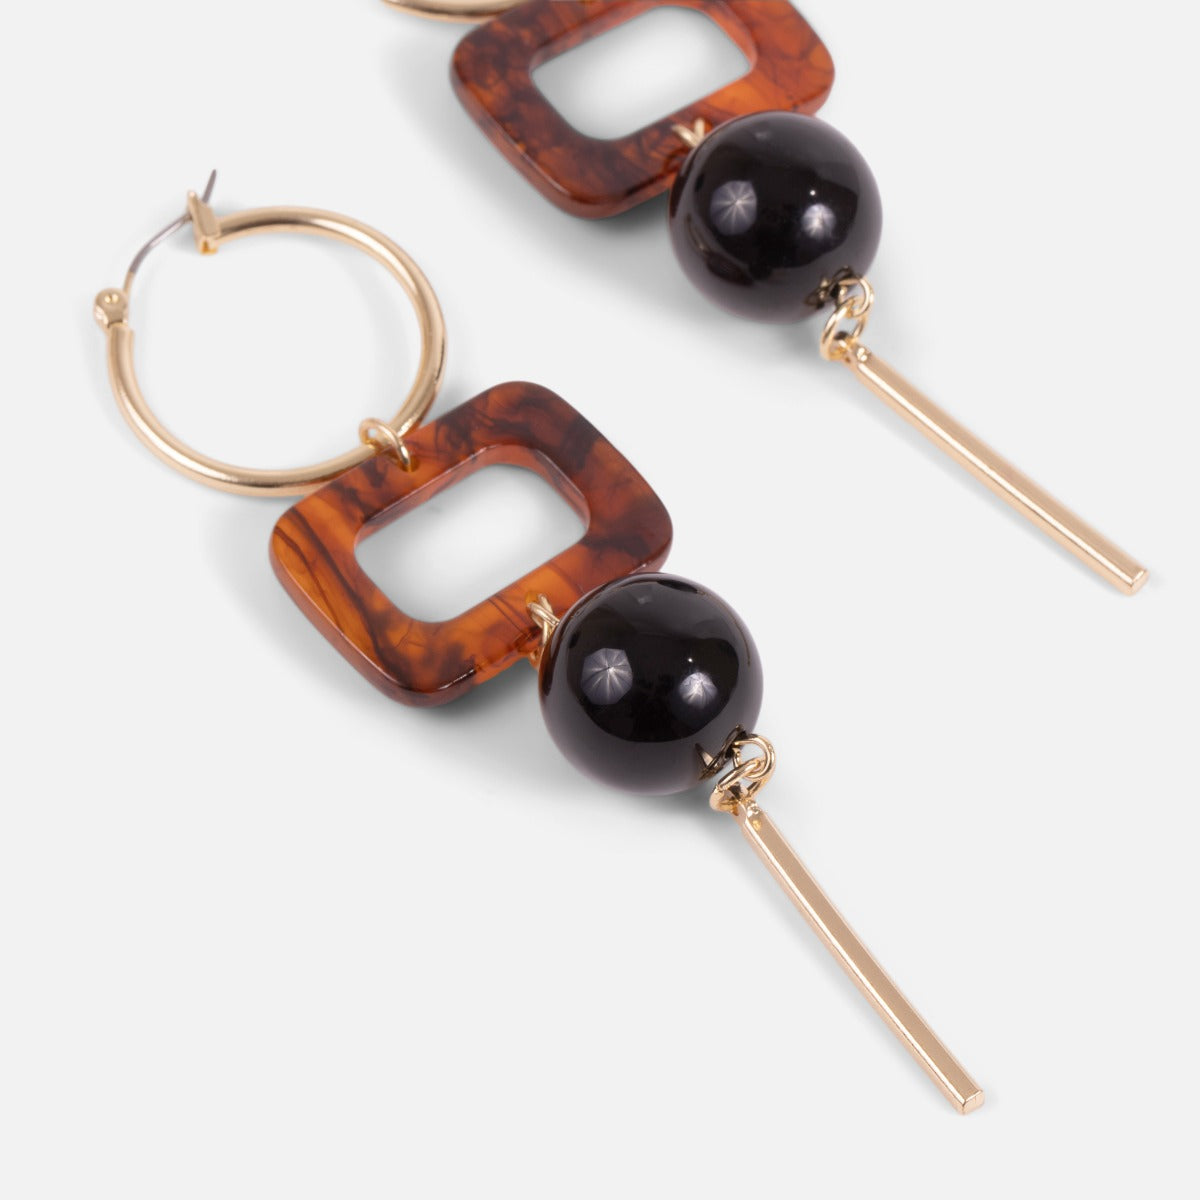 Long earrings with a rectangular tortoise pattern, a black bead and a golden bar